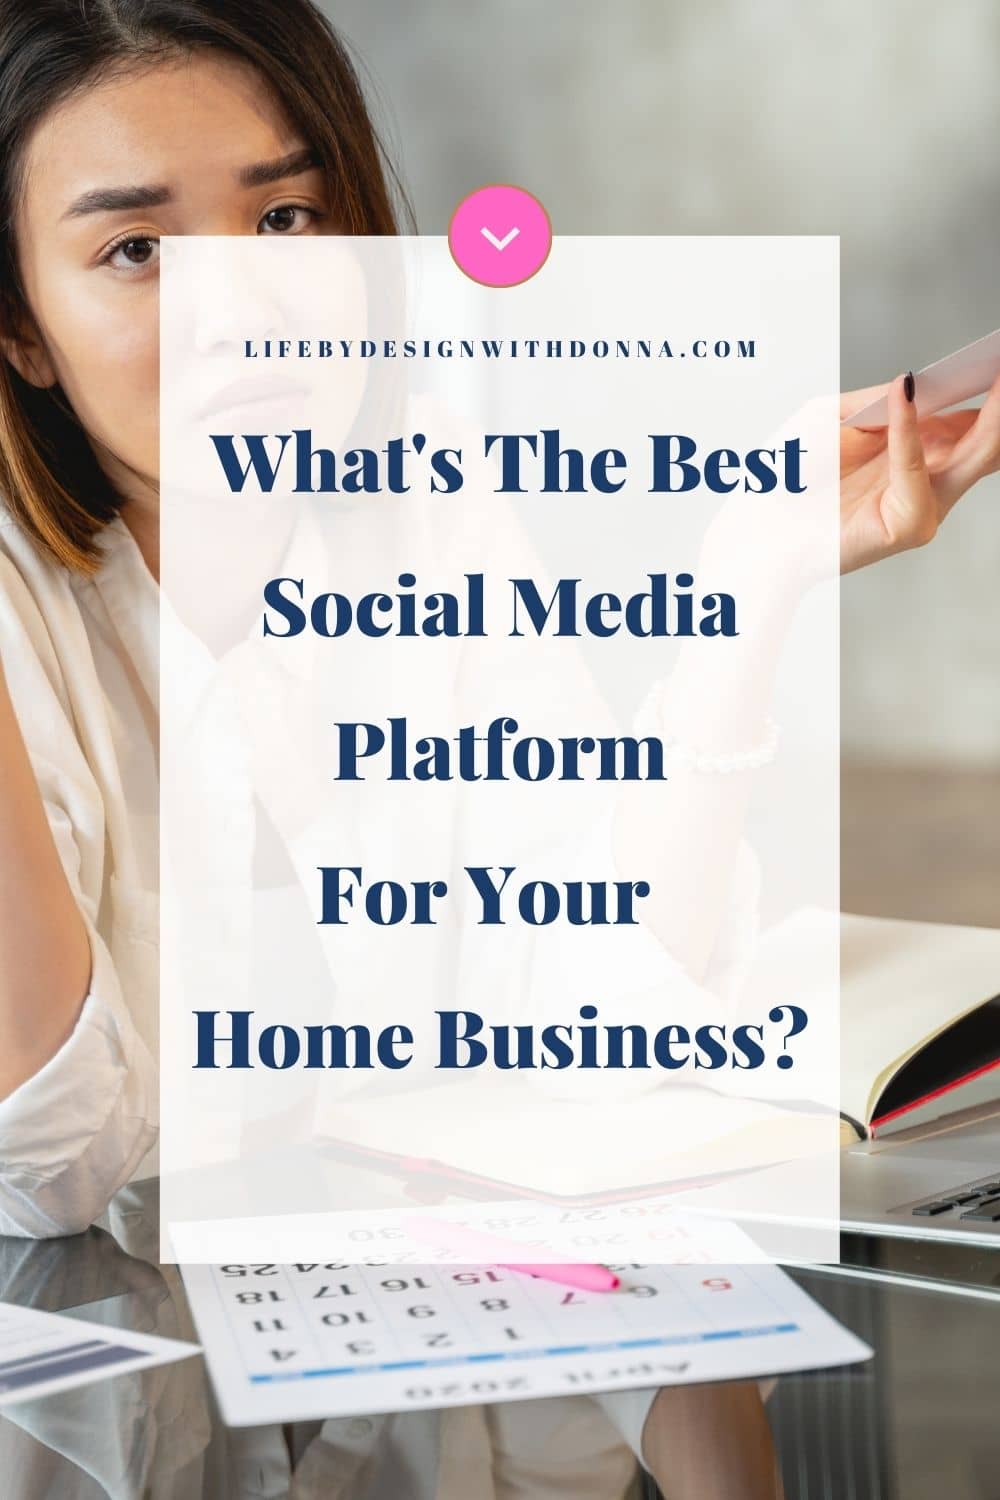 The 7 Questions  To Choose  The Best  Social Media   Platform for Your  Home Business